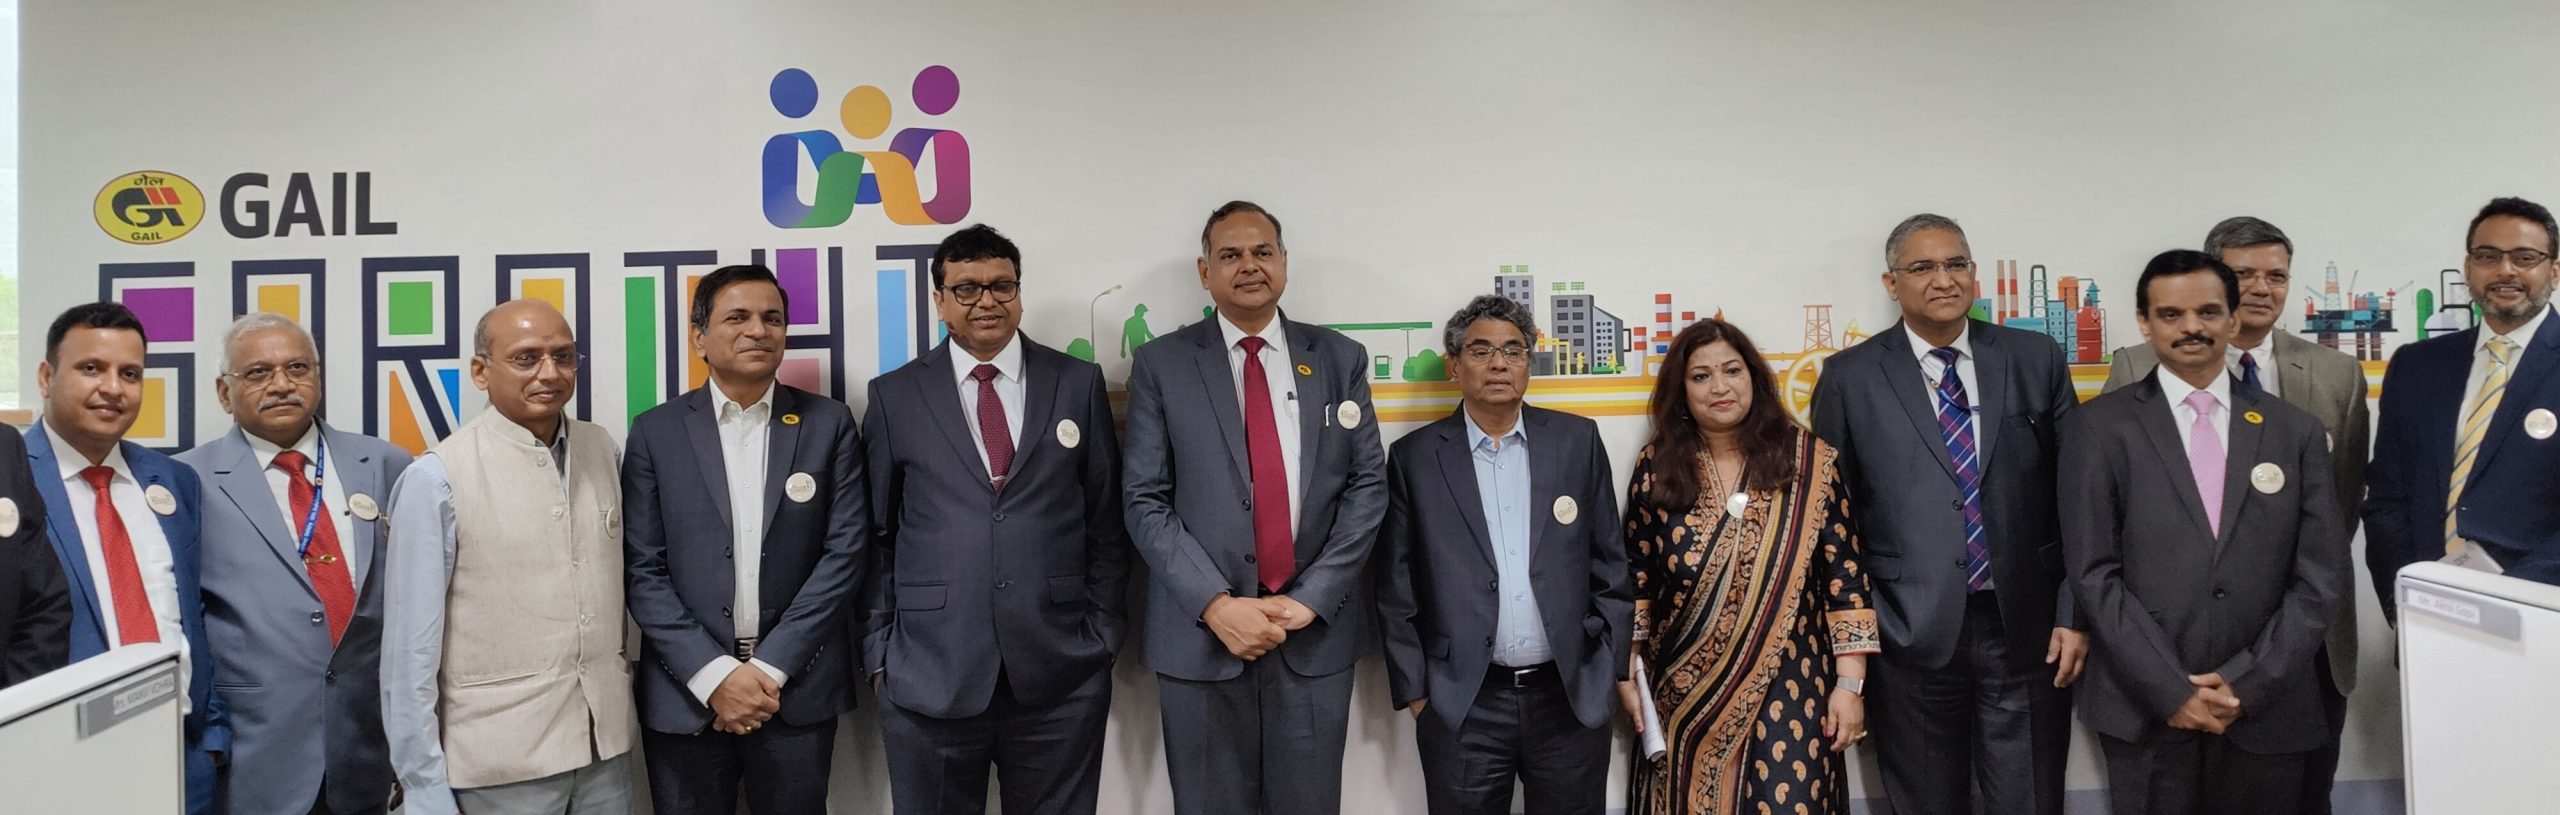 GAIL inaugurates state-of-the-art centre for digitization and centralization of its payments process Centre named ‘SARATHI’ partners with IBM Consulting and went live with SAP-OpenText’s Vendor Invoice Management (VIM)